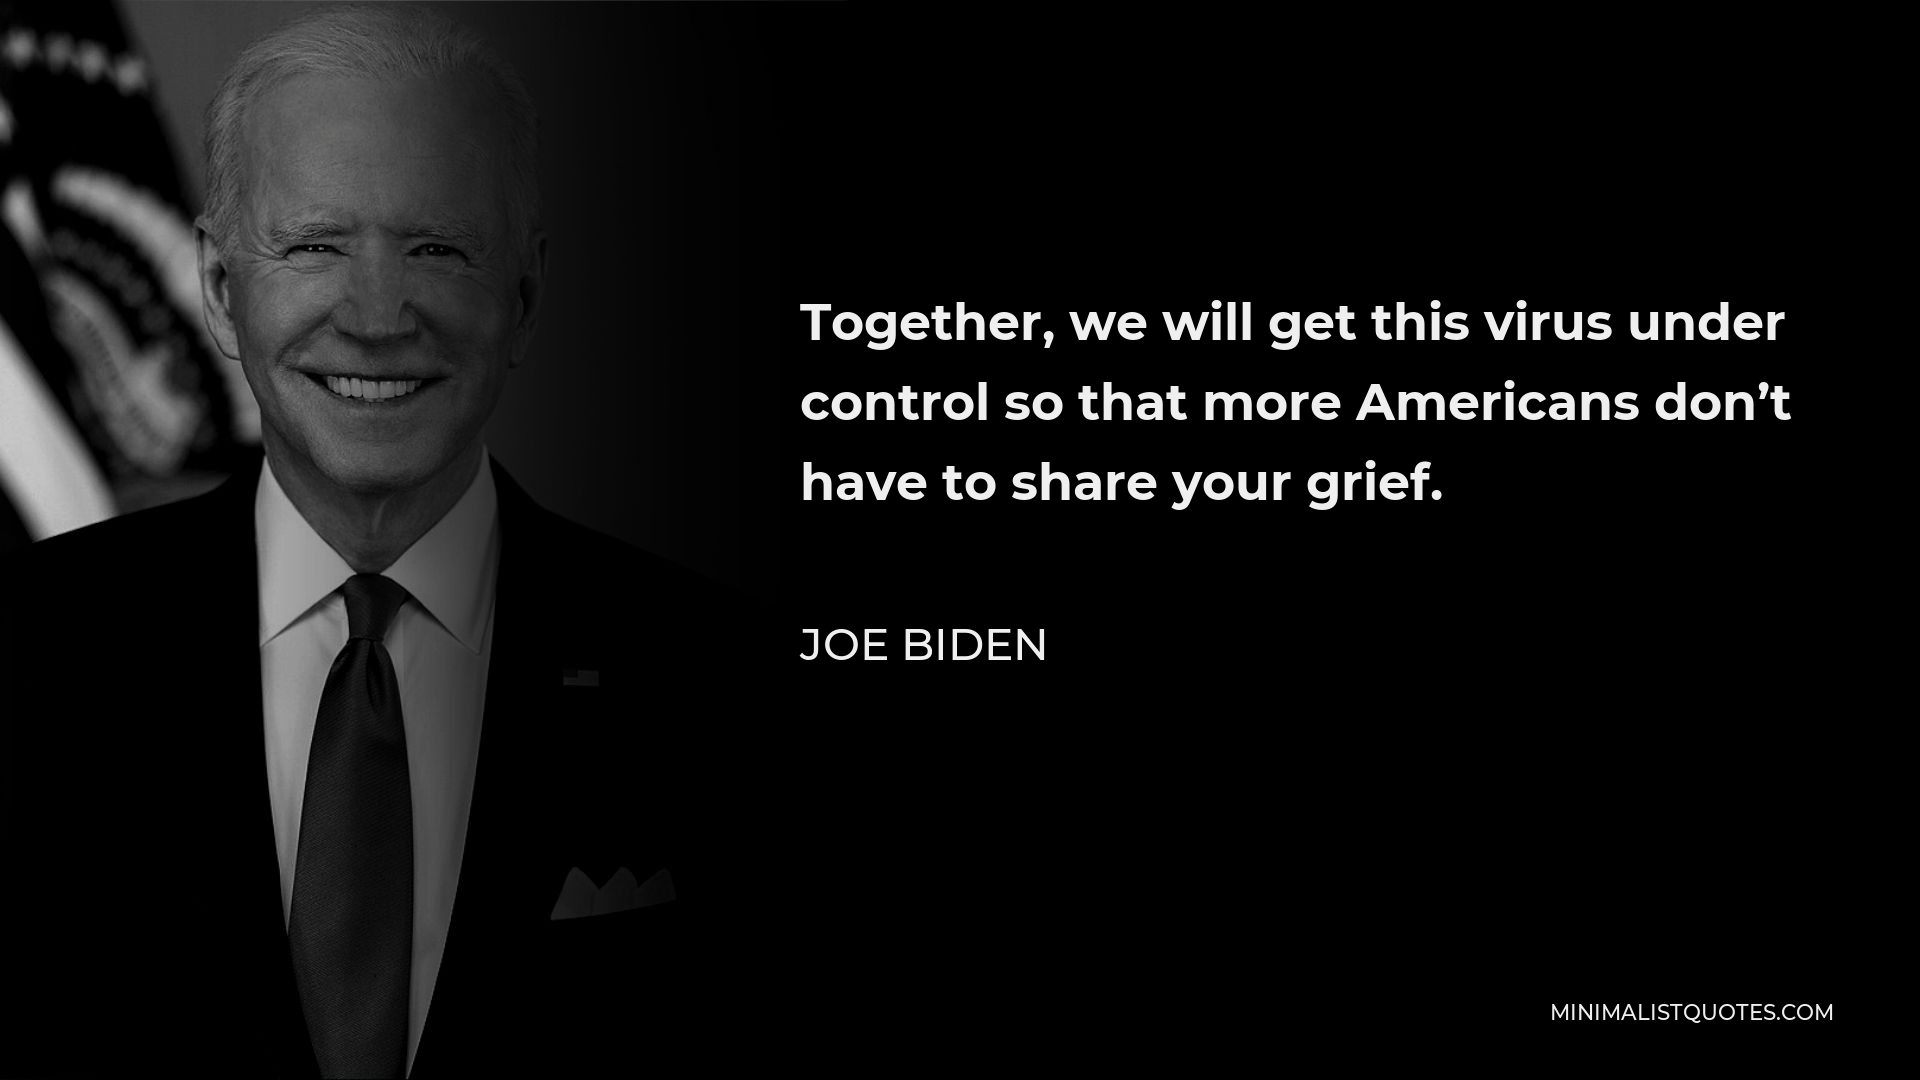 Joe Biden Quote - Together, we will get this virus under control so that more Americans don’t have to share your grief.